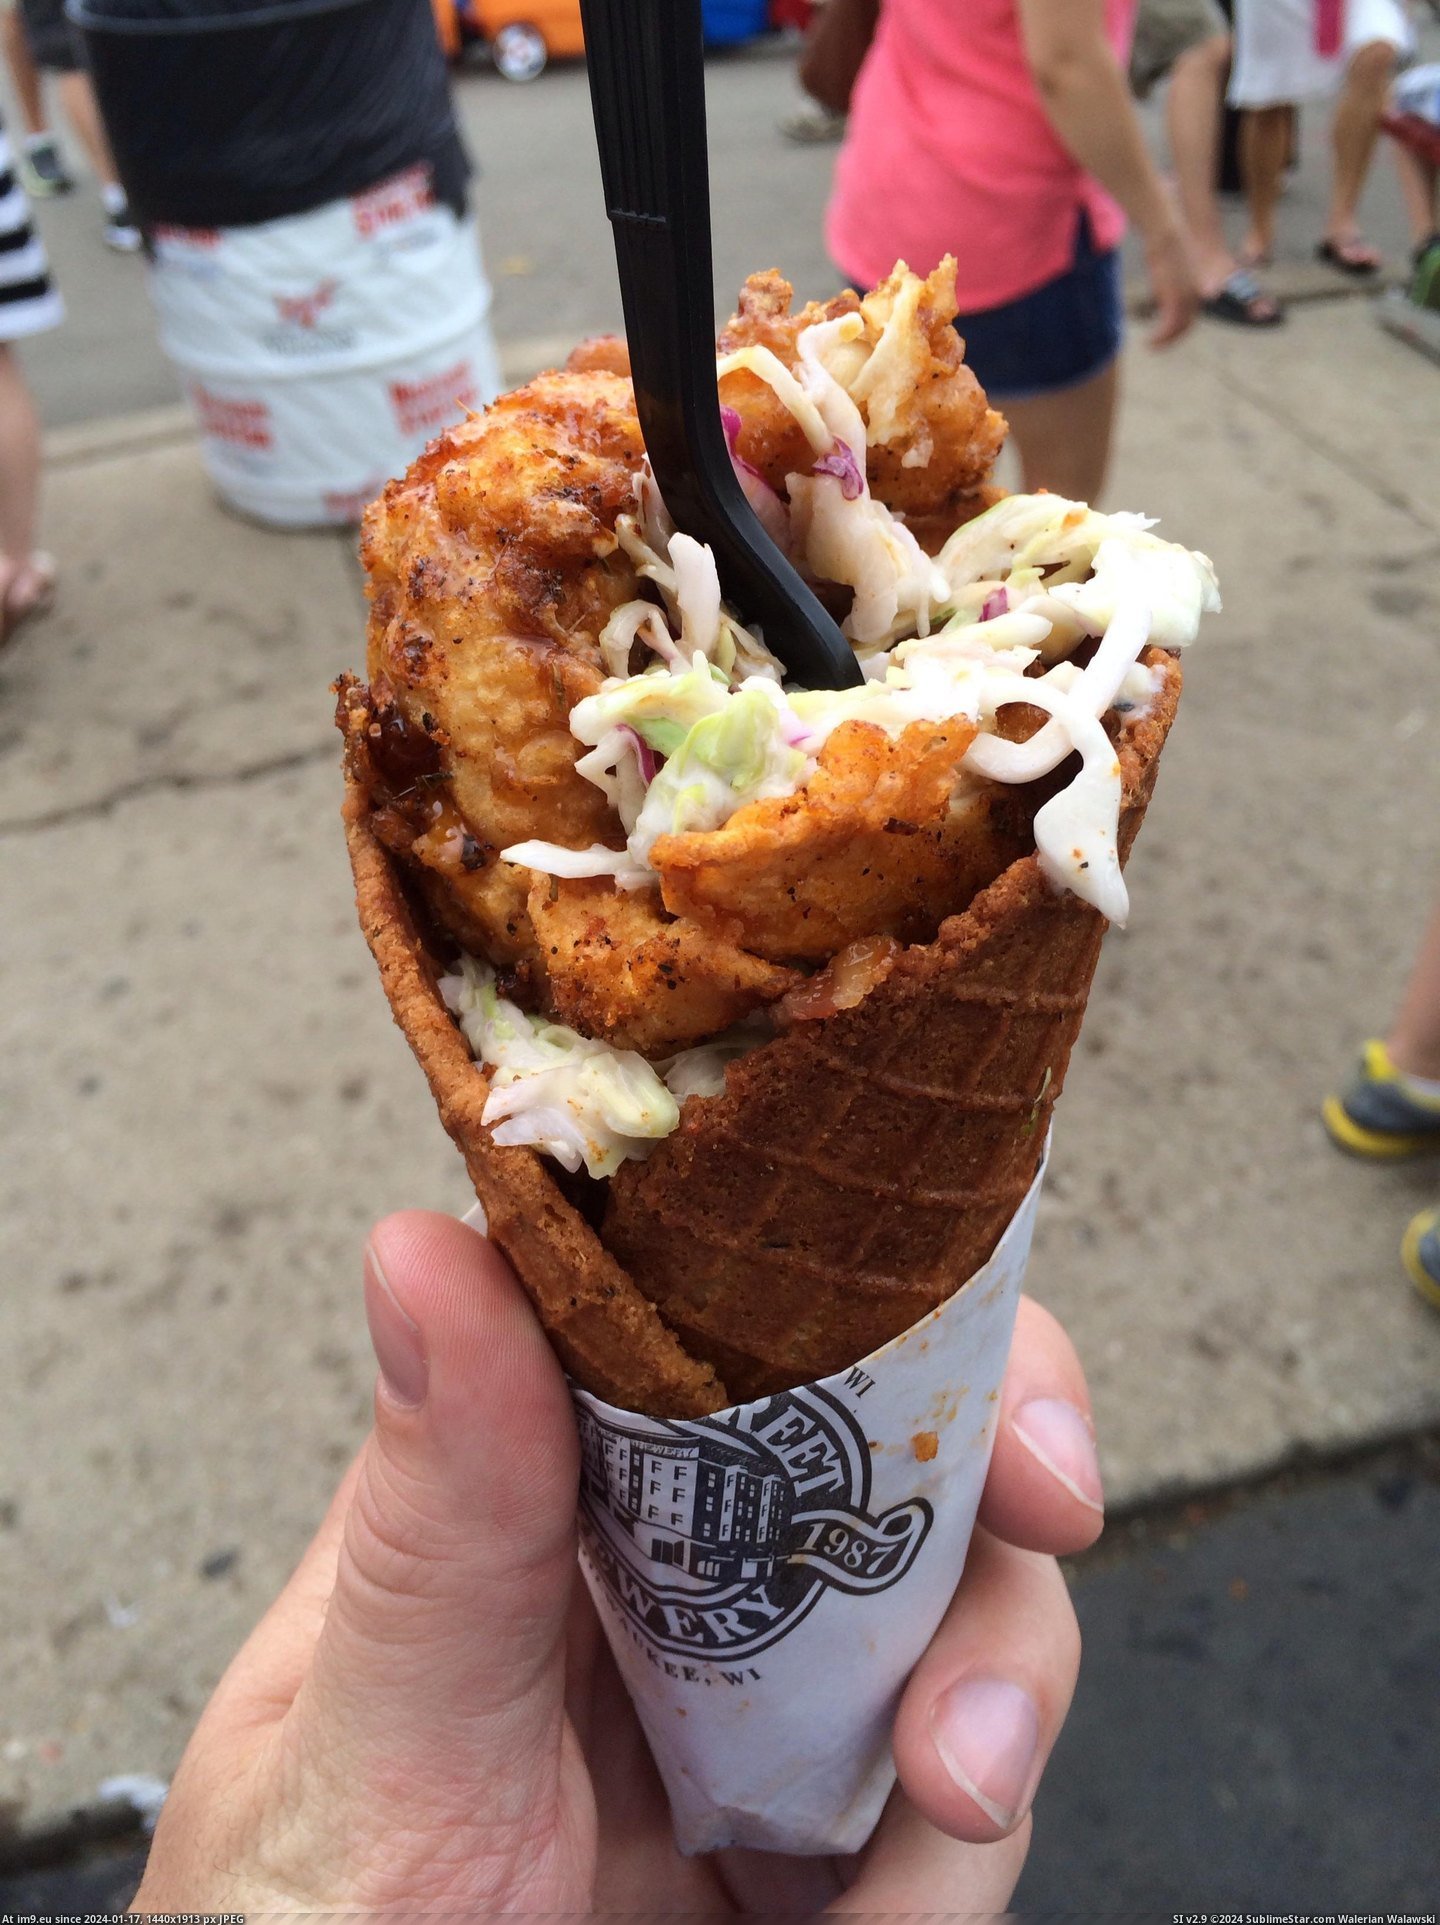 #State #Chicken #Wisconsin #Cone #Fair #Waffle [Pics] Chicken and waffle cone at Wisconsin state fair Pic. (Image of album My r/PICS favs))